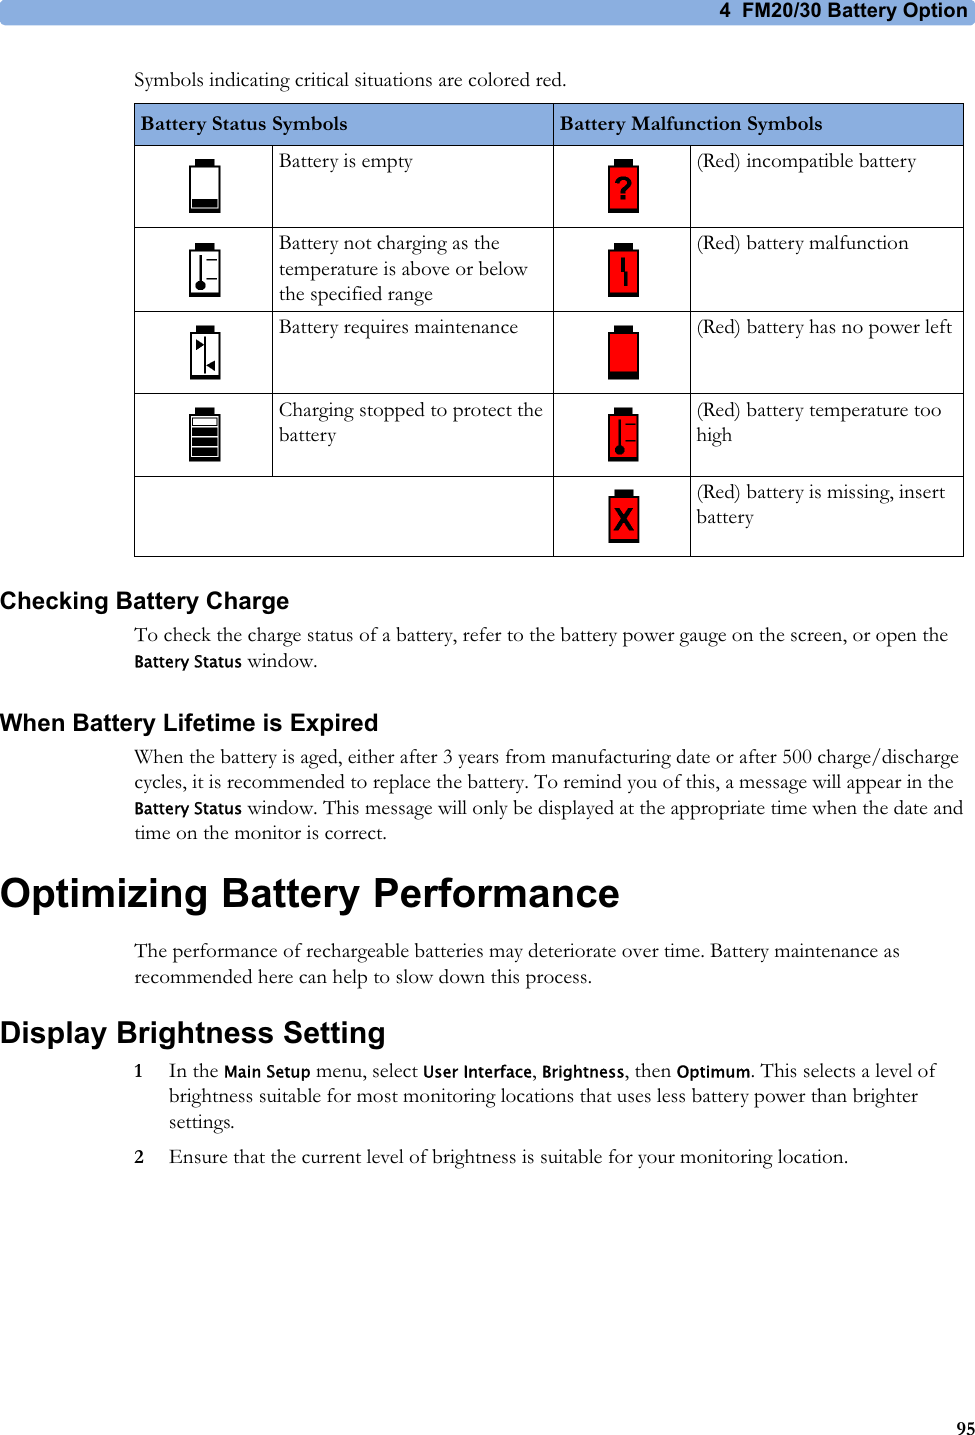 4  FM20/30 Battery Option95Symbols indicating critical situations are colored red.Checking Battery ChargeTo check the charge status of a battery, refer to the battery power gauge on the screen, or open the Battery Status window.When Battery Lifetime is ExpiredWhen the battery is aged, either after 3 years from manufacturing date or after 500 charge/discharge cycles, it is recommended to replace the battery. To remind you of this, a message will appear in the Battery Status window. This message will only be displayed at the appropriate time when the date and time on the monitor is correct.Optimizing Battery PerformanceThe performance of rechargeable batteries may deteriorate over time. Battery maintenance as recommended here can help to slow down this process.Display Brightness Setting1In the Main Setup menu, select User Interface, Brightness, then Optimum. This selects a level of brightness suitable for most monitoring locations that uses less battery power than brighter settings.2Ensure that the current level of brightness is suitable for your monitoring location.Battery Status Symbols Battery Malfunction SymbolsBattery is empty (Red) incompatible batteryBattery not charging as the temperature is above or below the specified range(Red) battery malfunctionBattery requires maintenance (Red) battery has no power leftCharging stopped to protect the battery(Red) battery temperature too high(Red) battery is missing, insert battery